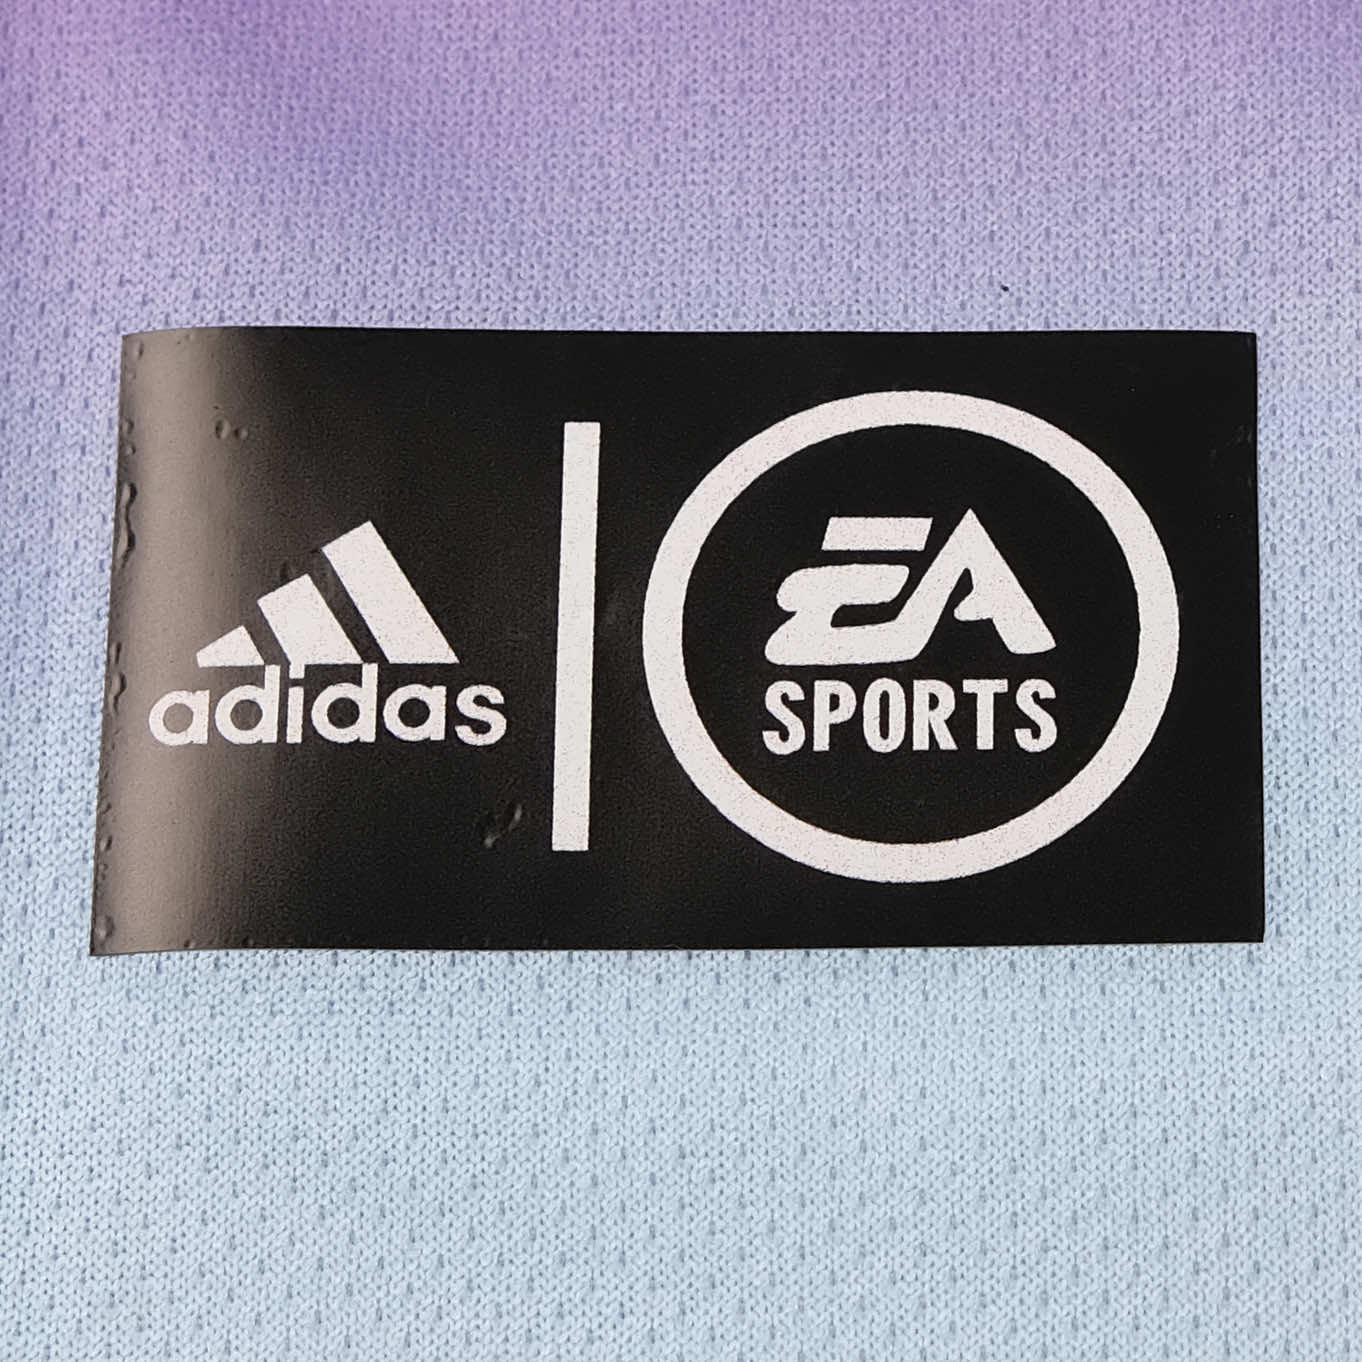 Juventus 18/19 Special "EA Sports" Jersey